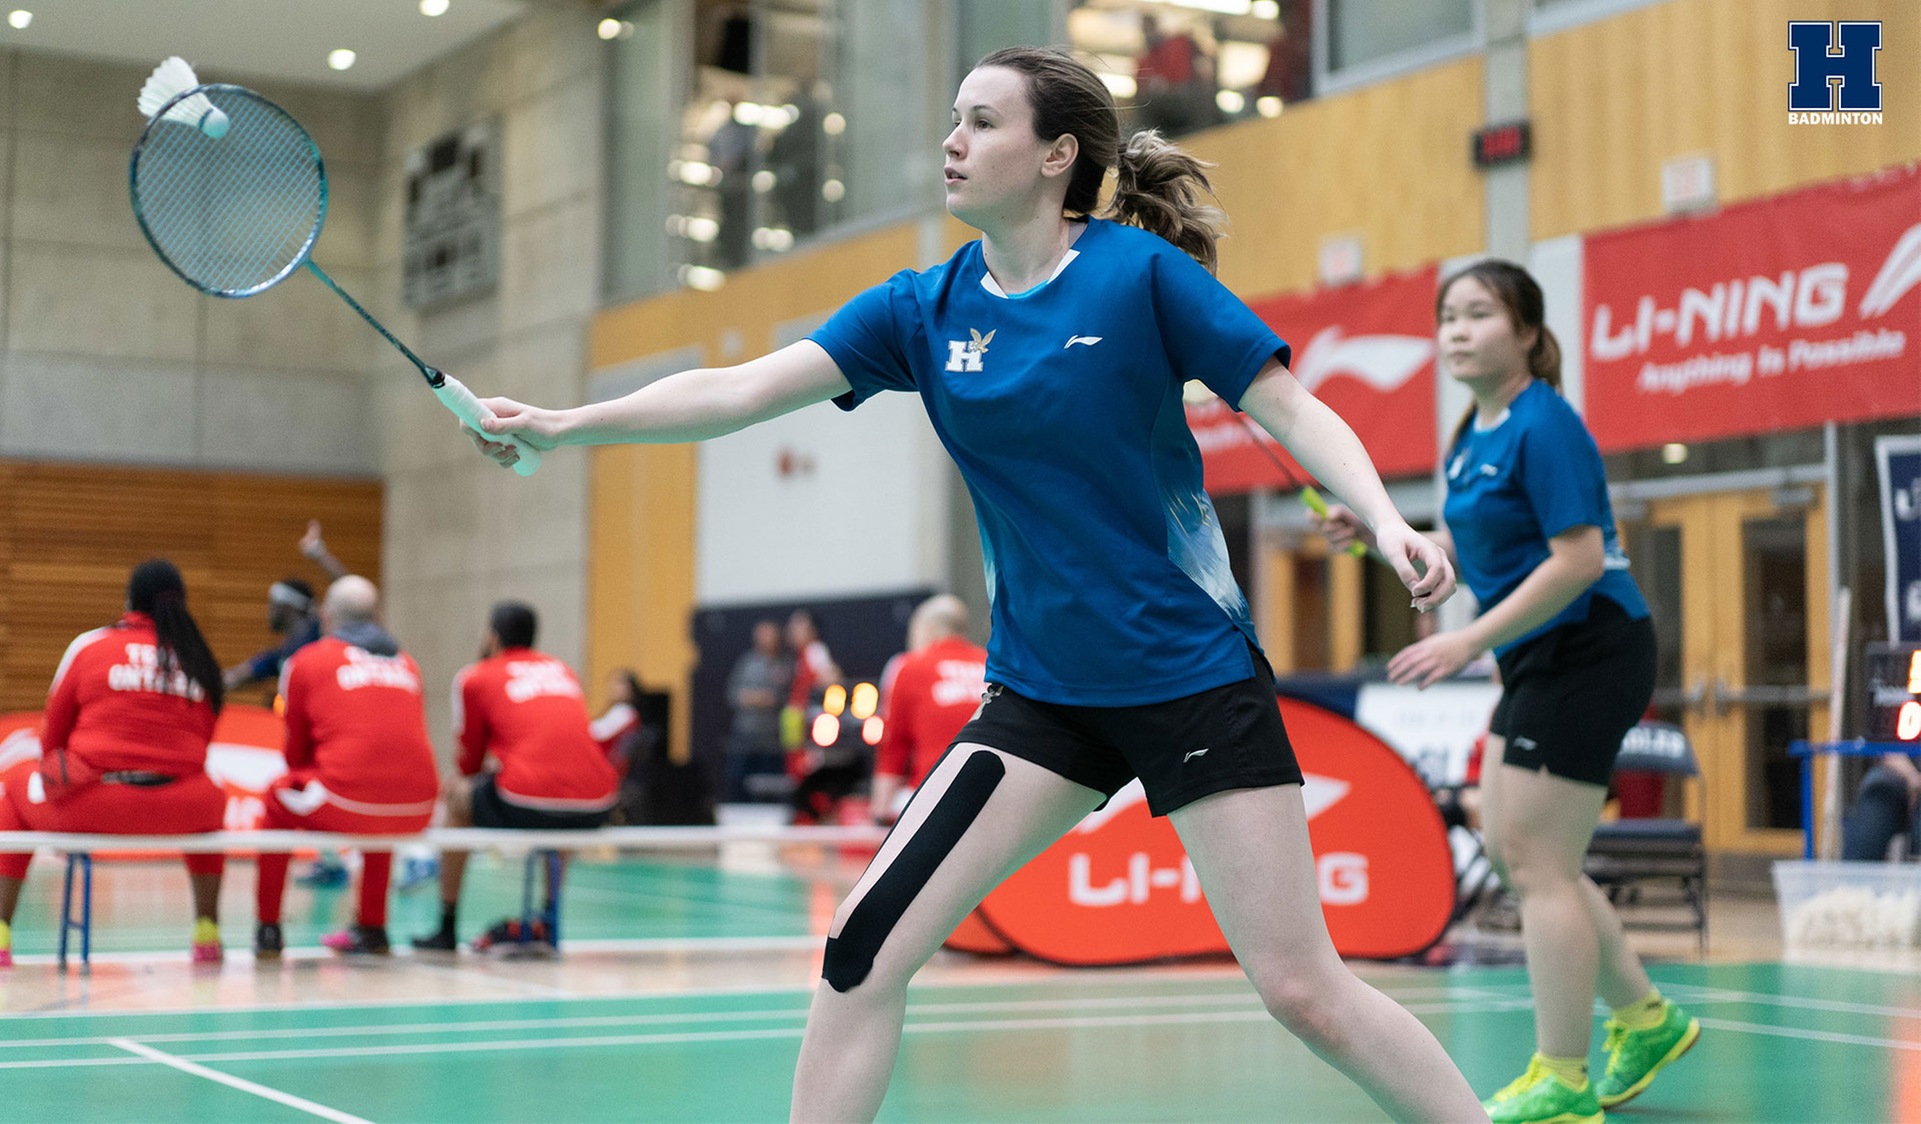 Four National Medals on the Line for No. 2 Badminton